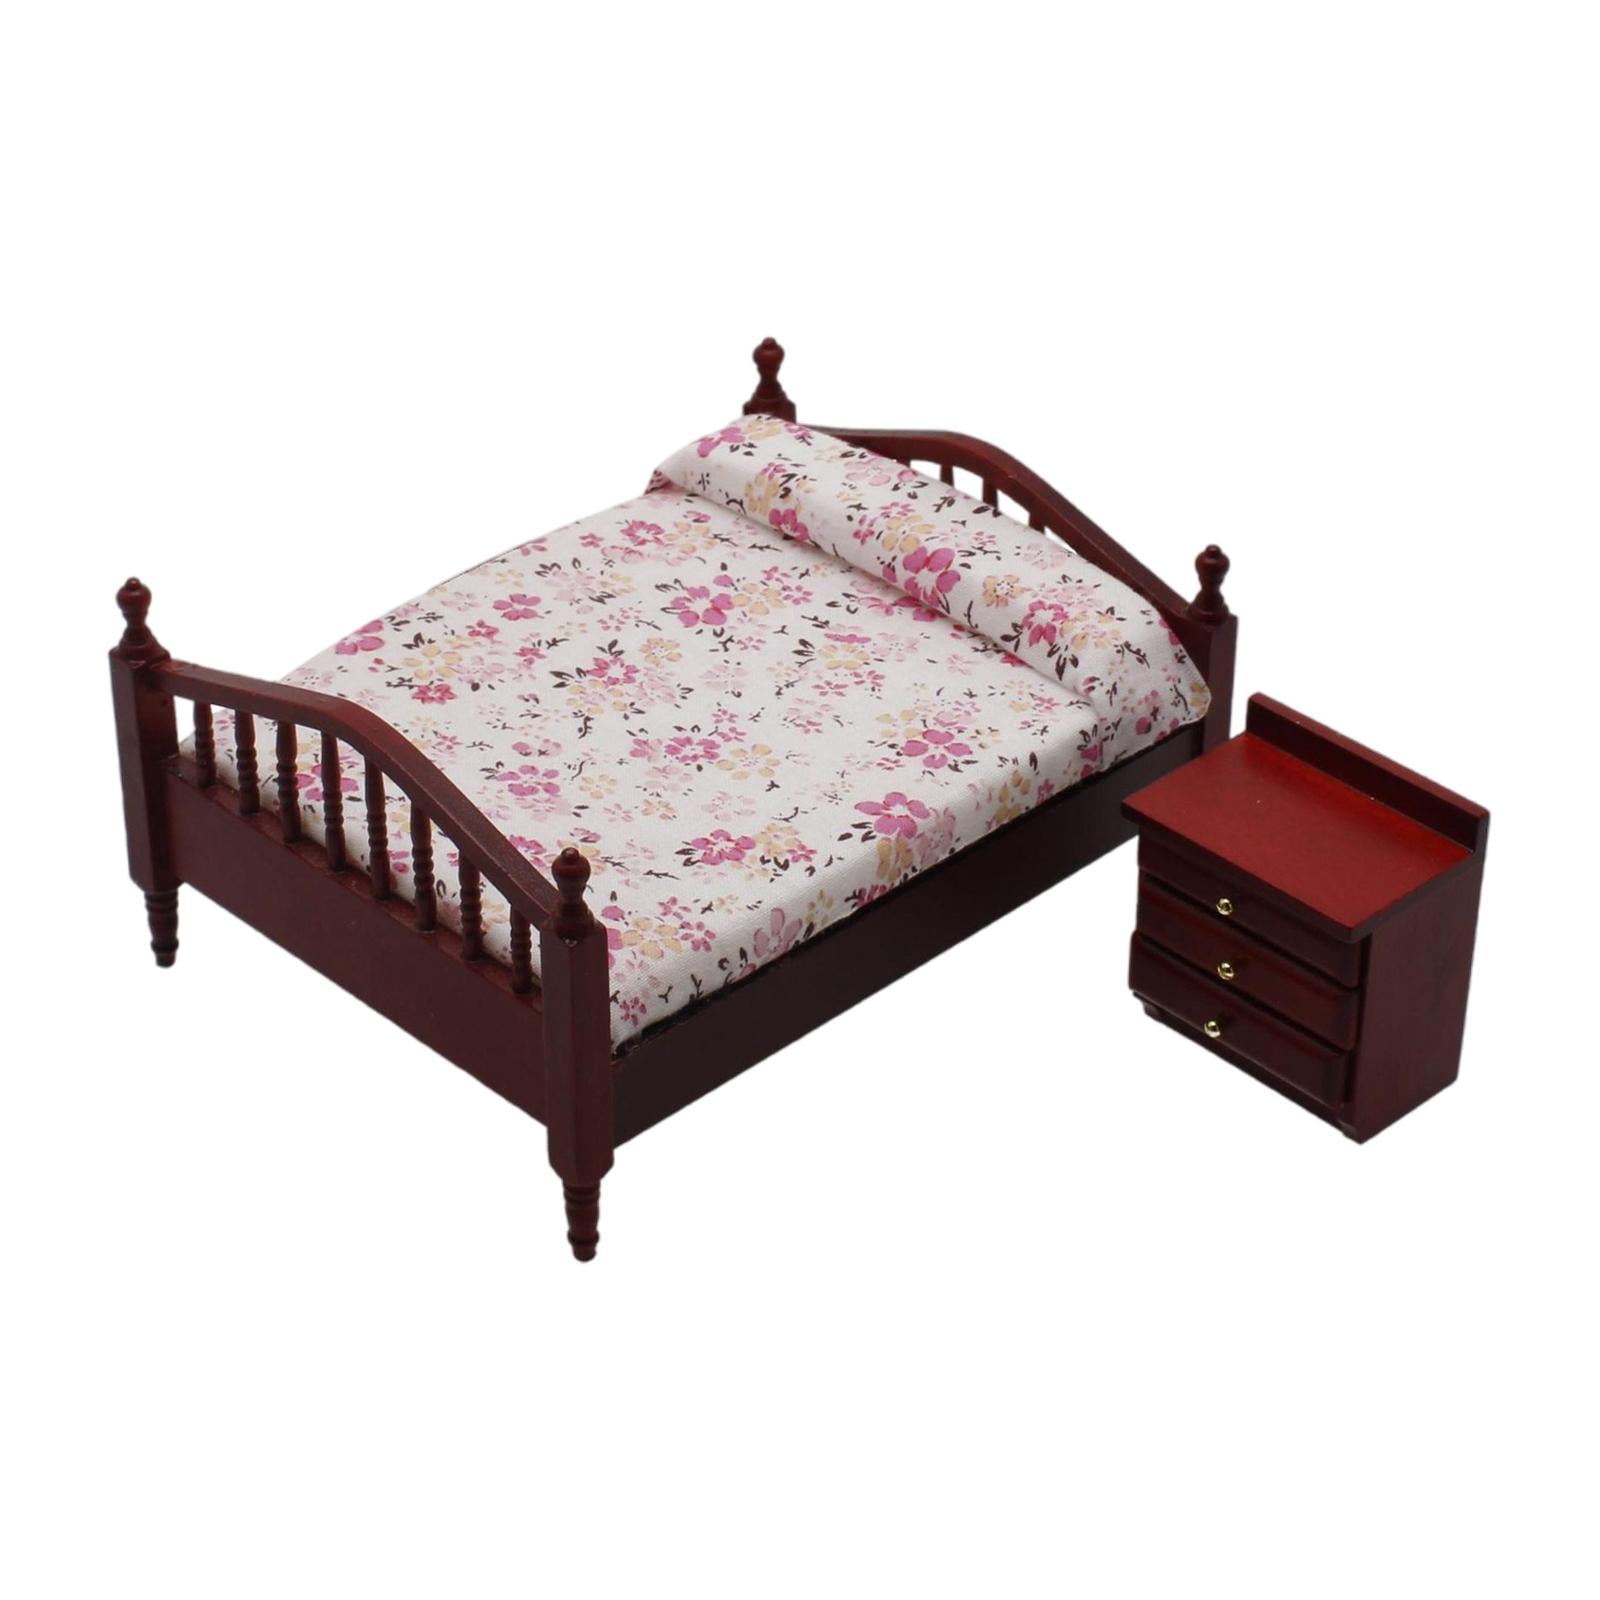 1:12 Dollhouse Miniature Double Flower Wooden Bed For Bed Room With Bedding \ 